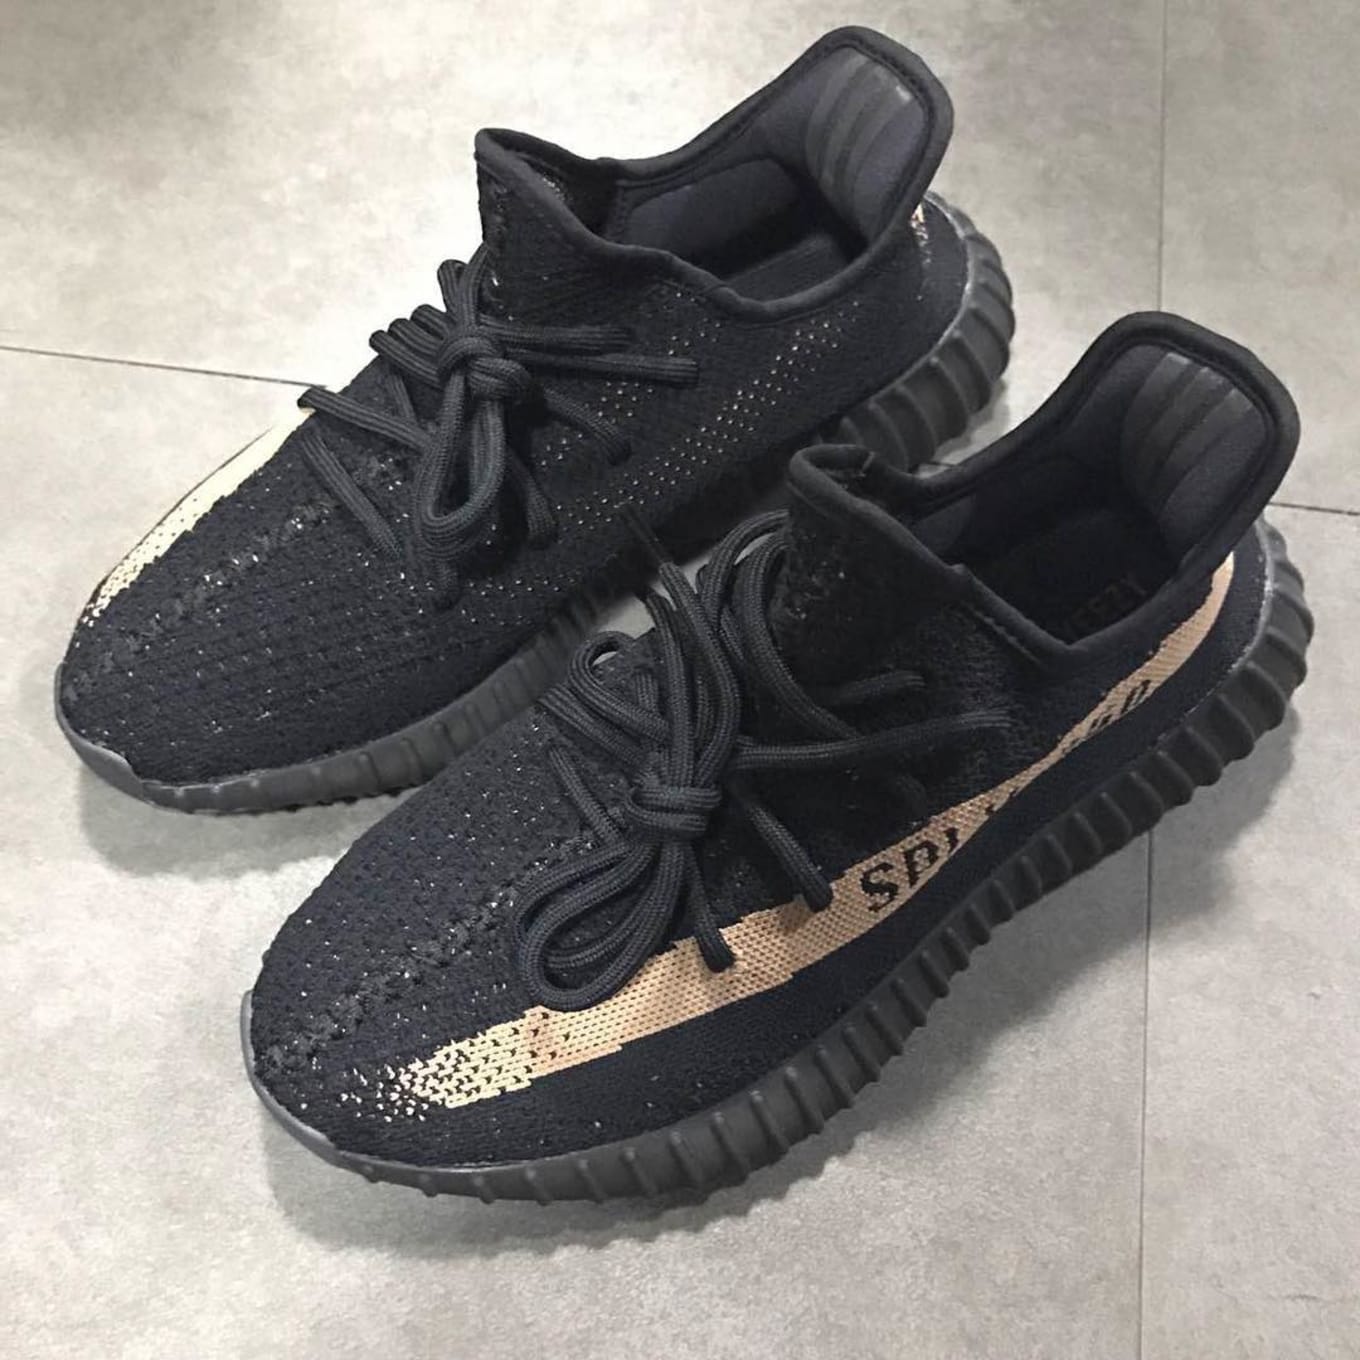 Black Friday Yeezy Samples | Sole Collector